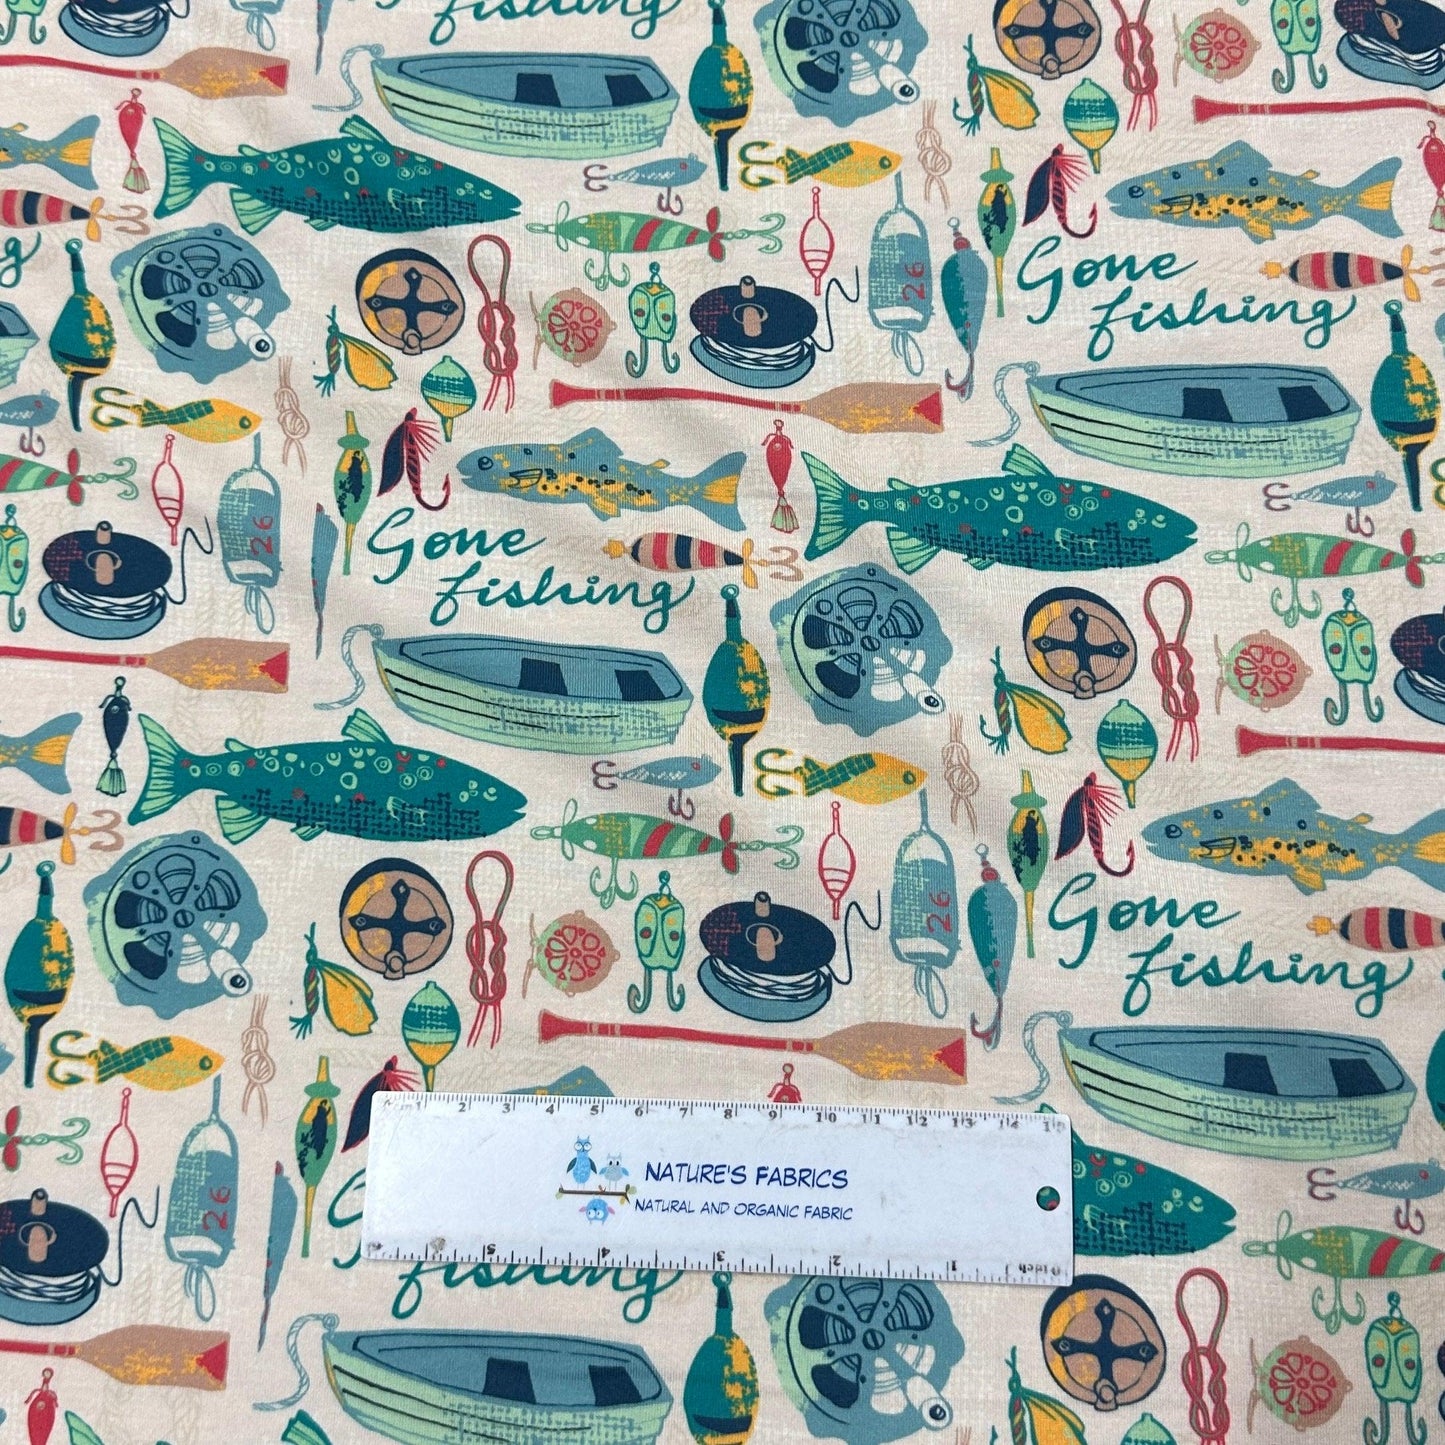 Gone Fishing on Polyester/Spandex Jersey Fabric - Nature's Fabrics